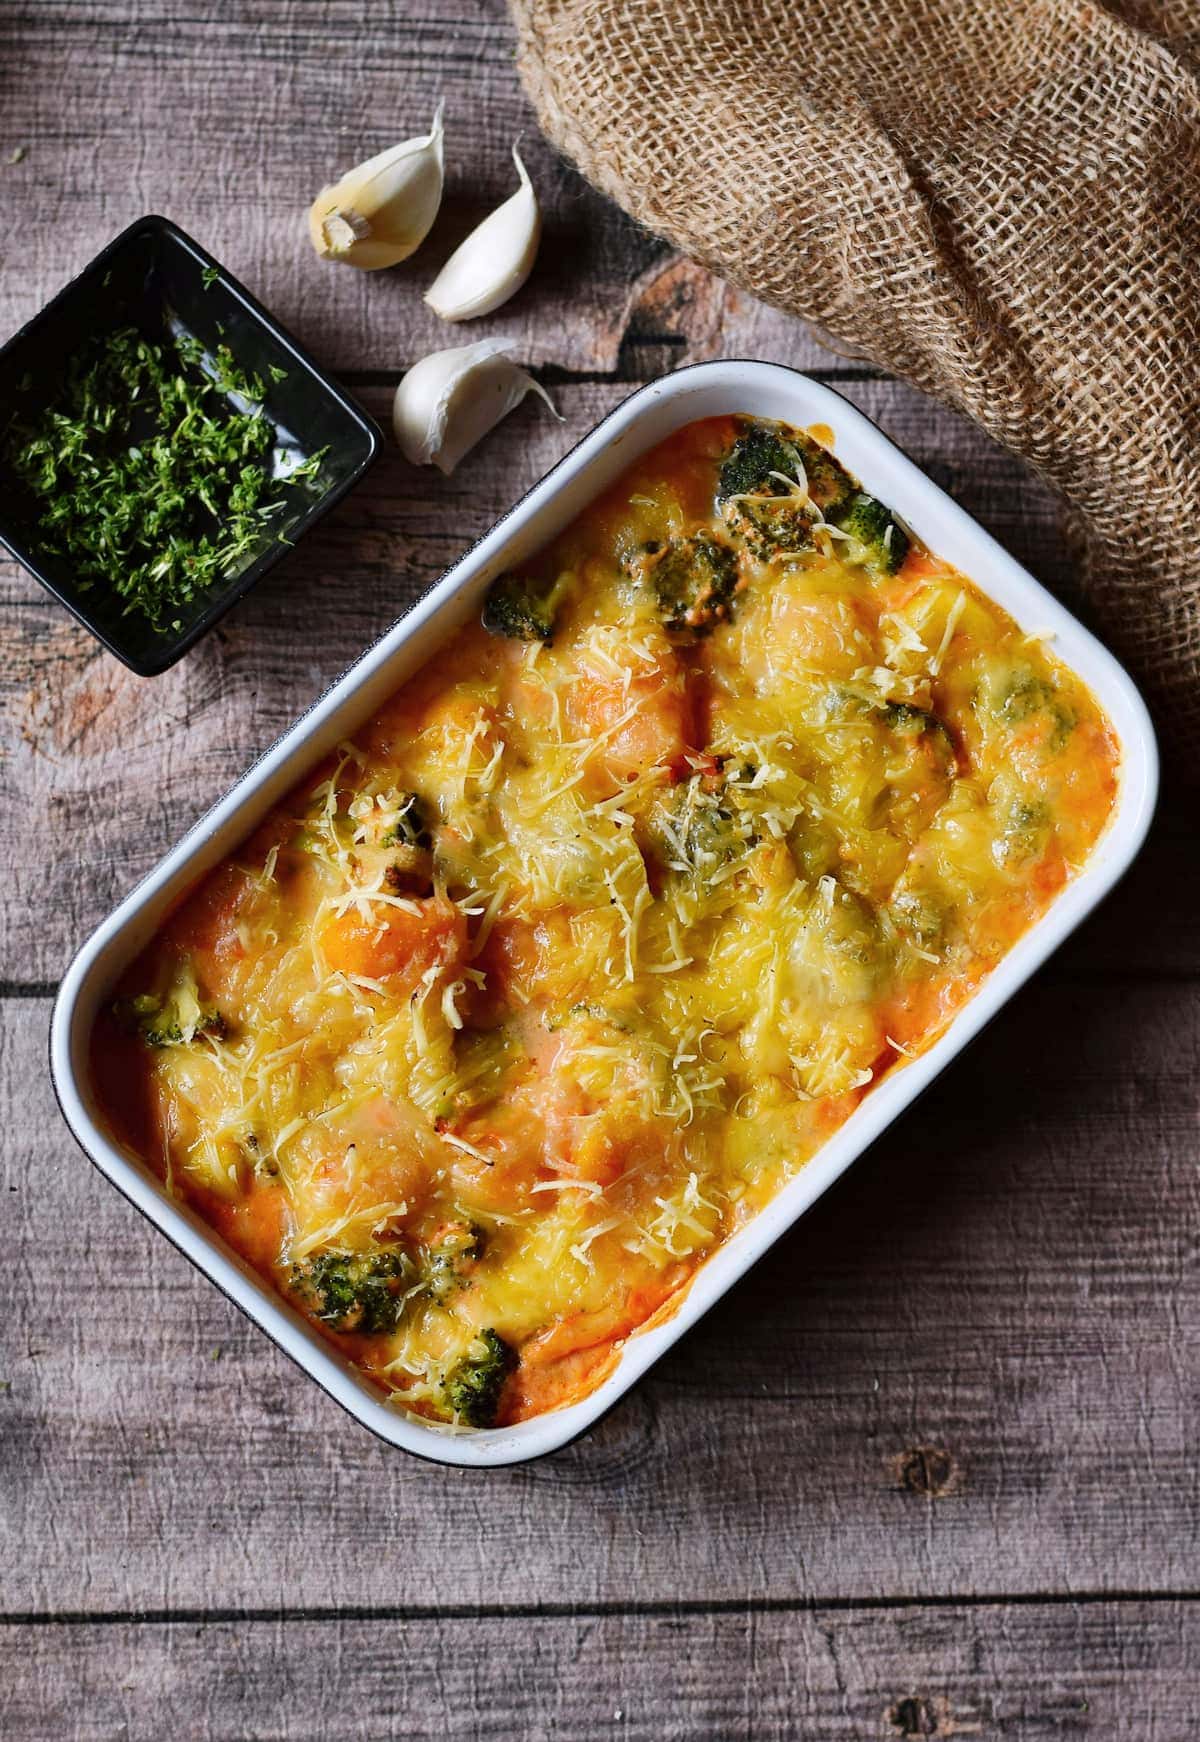 gnocchi bake with broccoli and vegan cheese from above